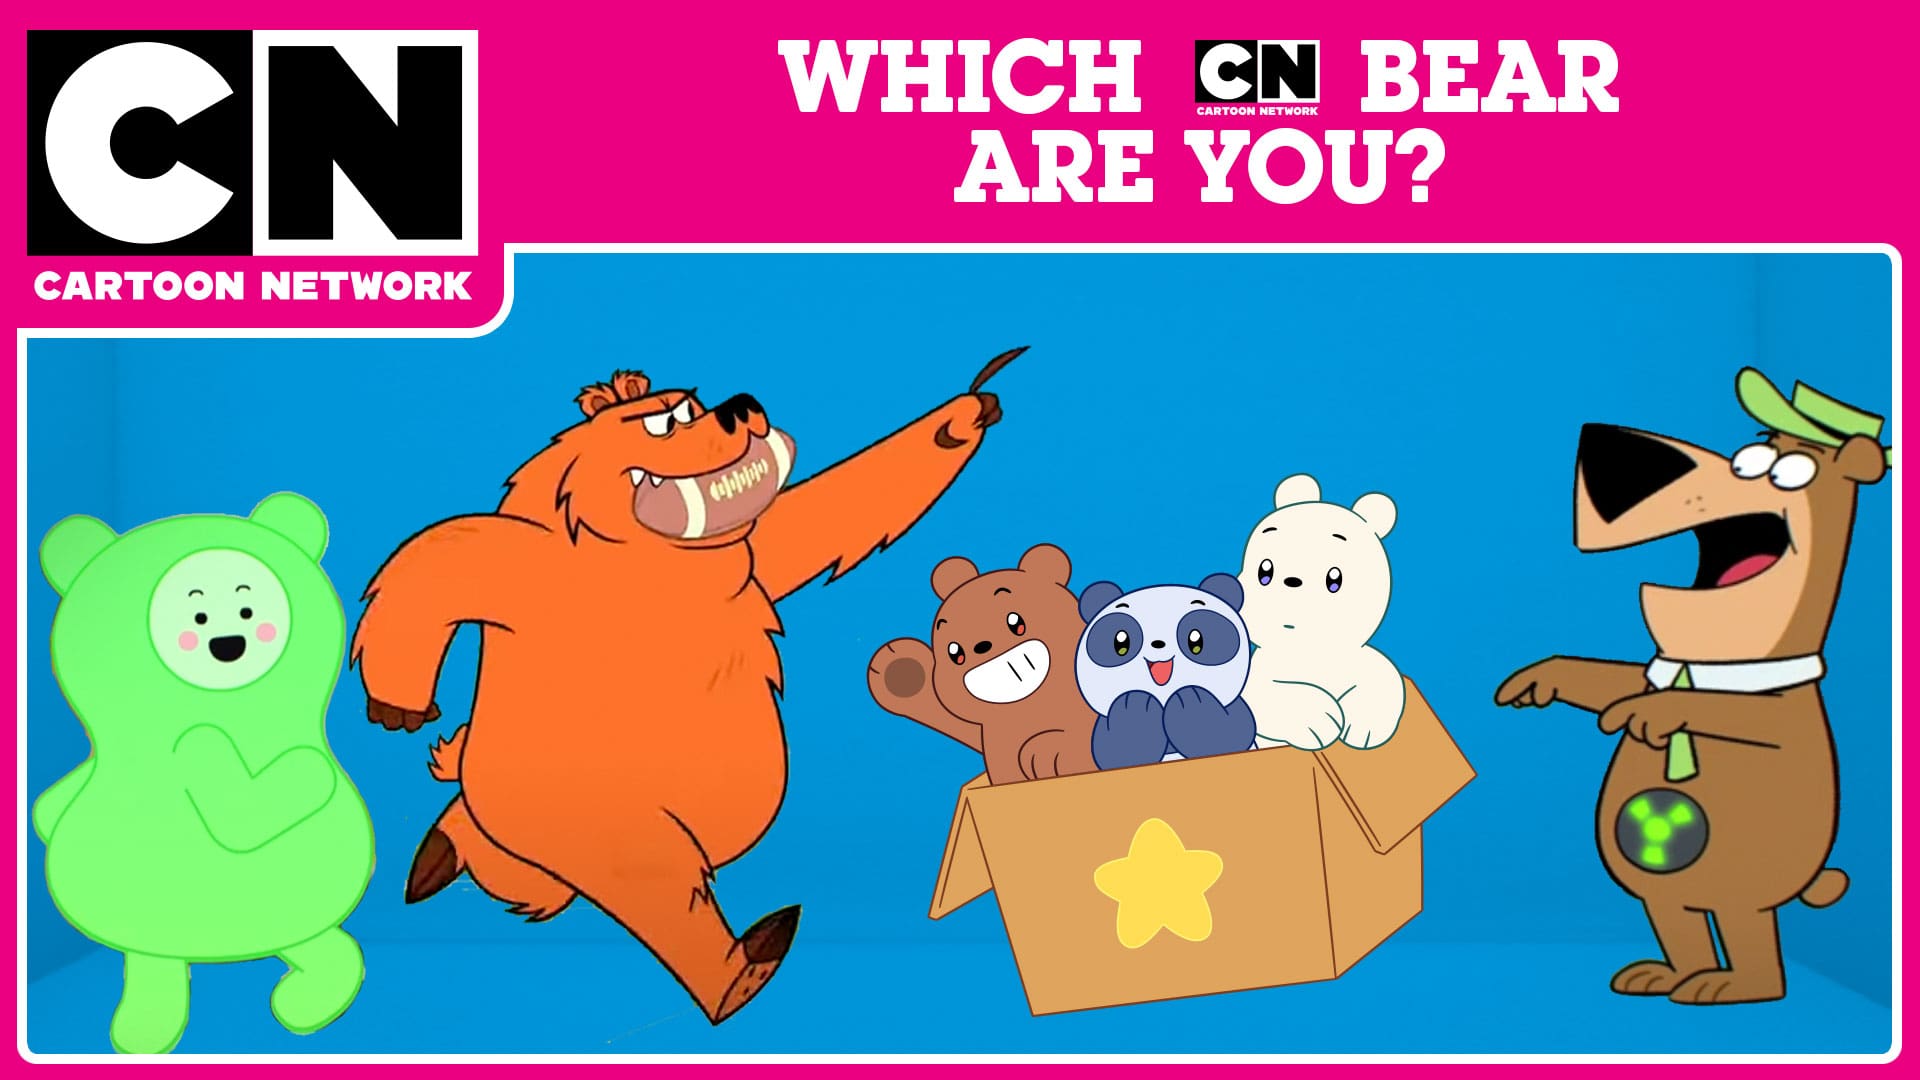 QUIZ: Which Cartoon Network bear are you?